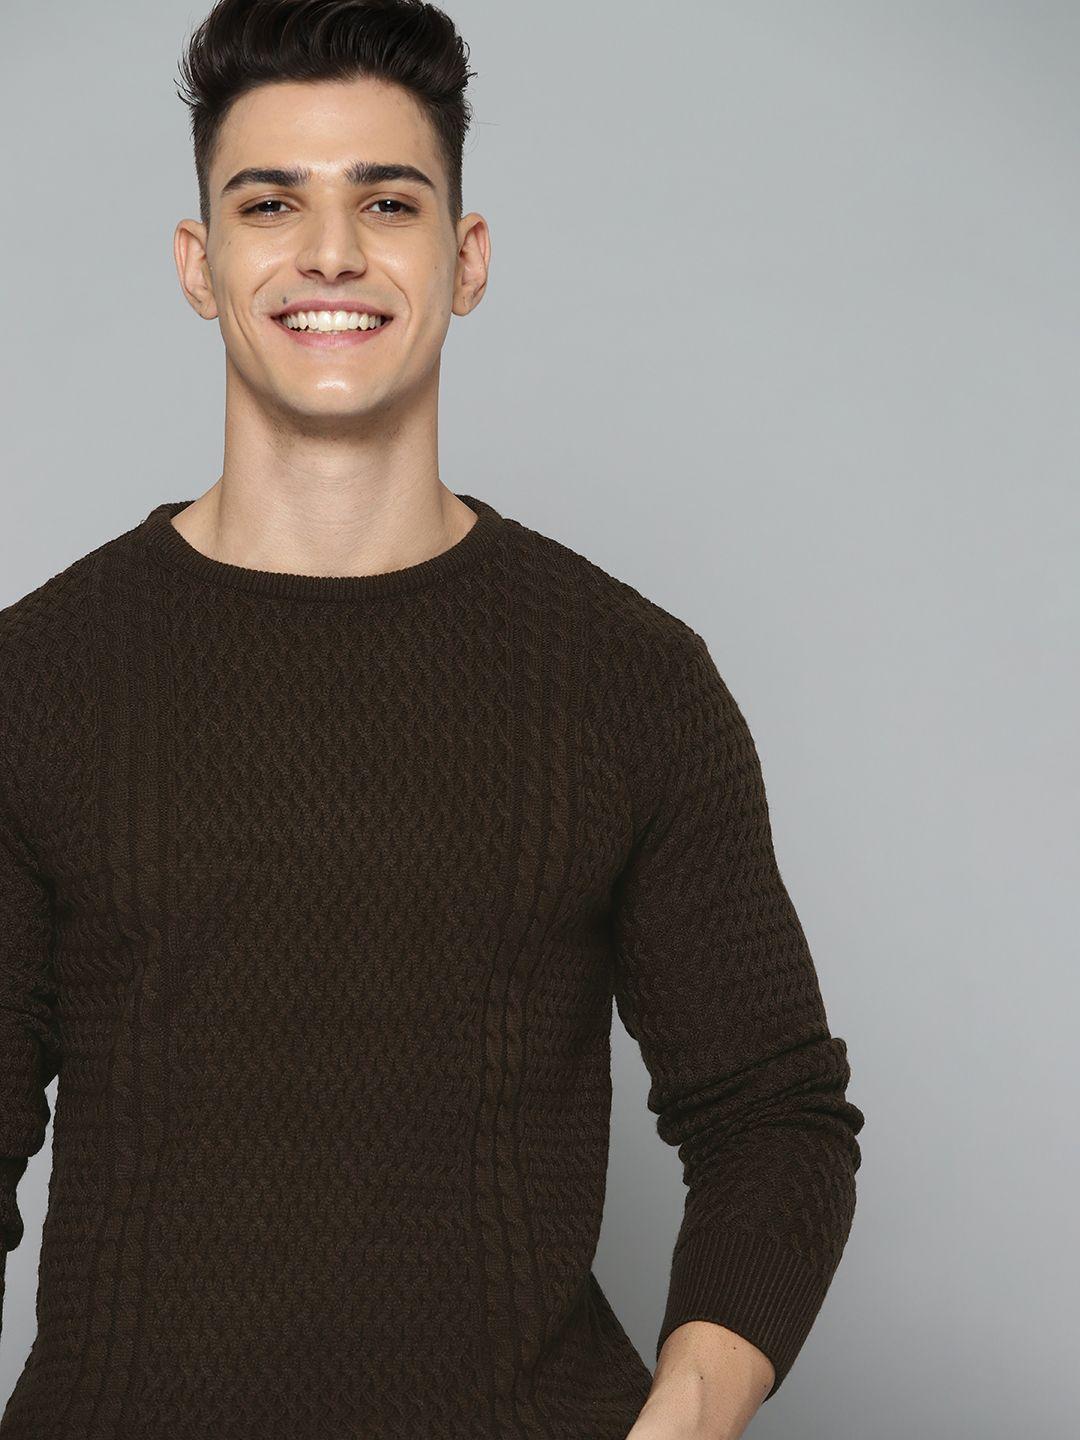 mast-&-harbour-men-coffee-brown-cable-knit-self-design-pullover